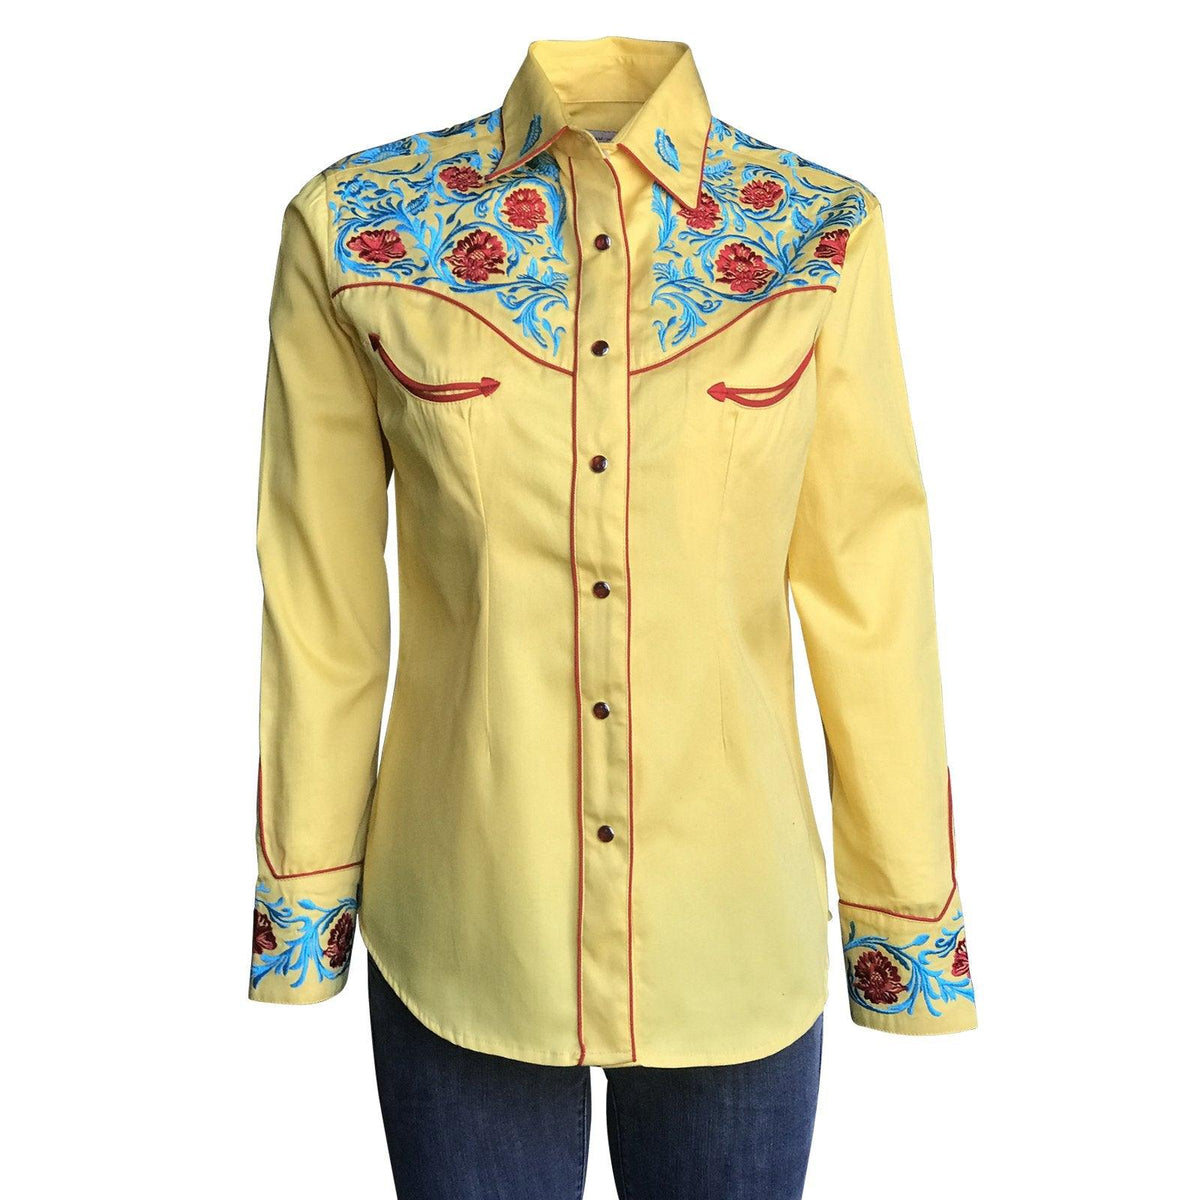 Rockmount Men's 2-Tone Yellow & Black Floral Embroidery Western Shirt